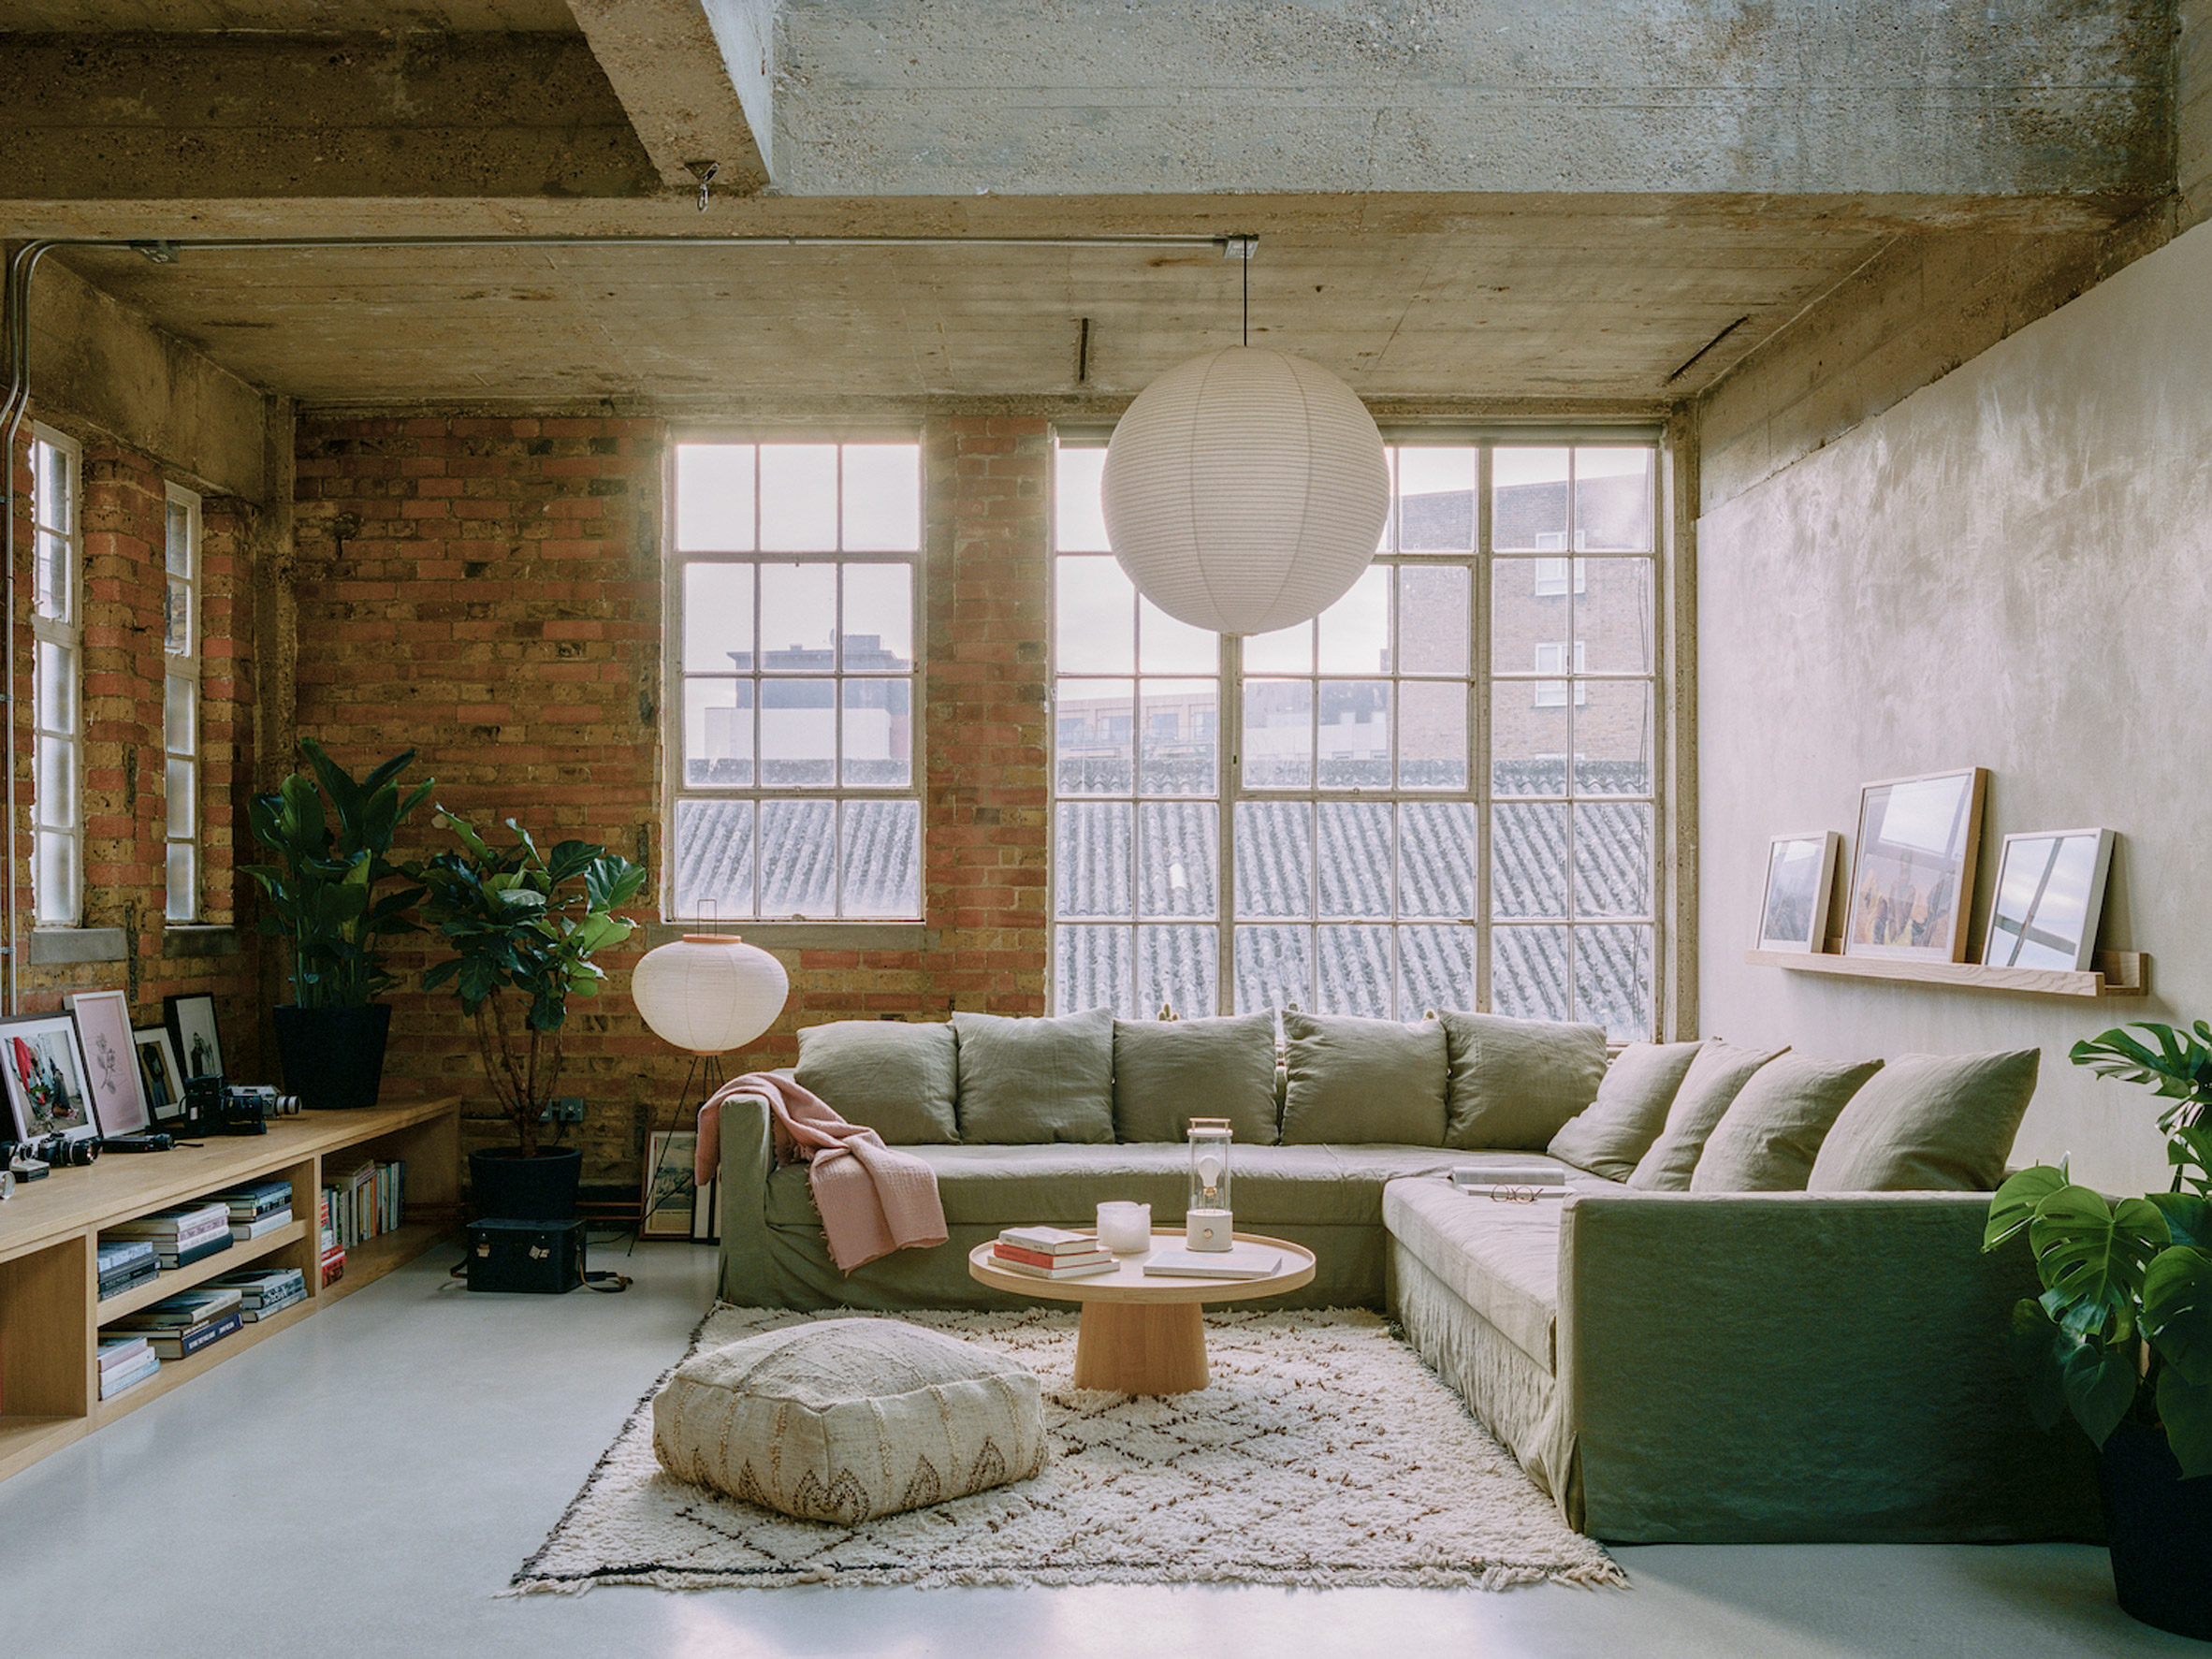 Open plan living room with exposed brick walls and steel windows designed by Studio McW